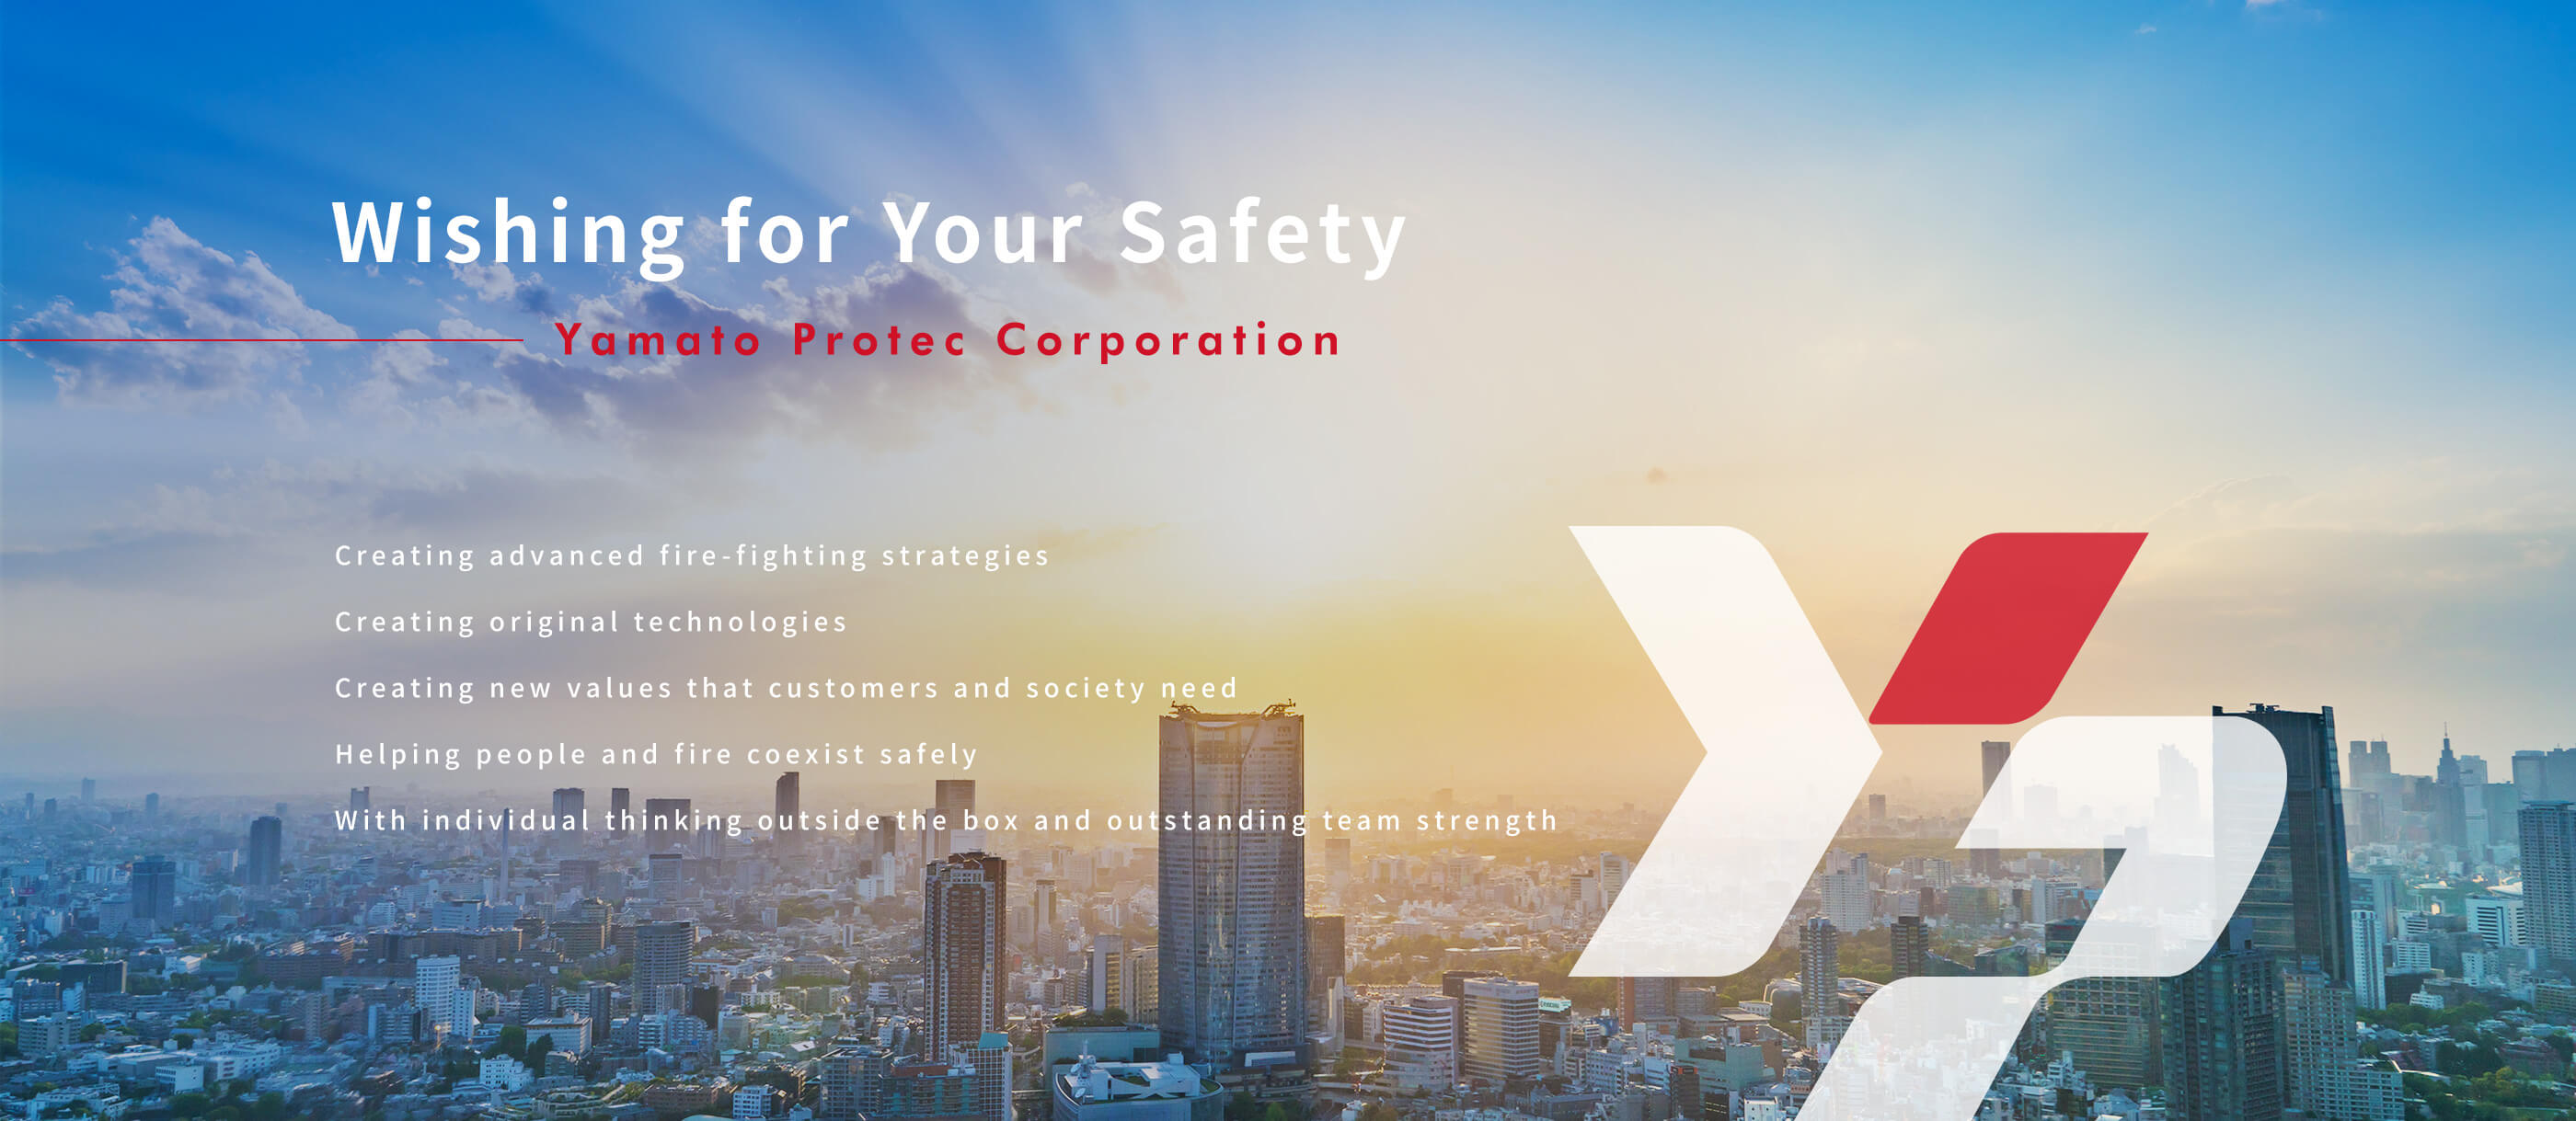 Wishing for Your Safety Yamato Protec Corporation Creating advanced fire-fighting strategies Creating original technologies Creating new values that customers and society need Helping people and fire coexist safely With individual thinking outside the box and outstanding team s trength